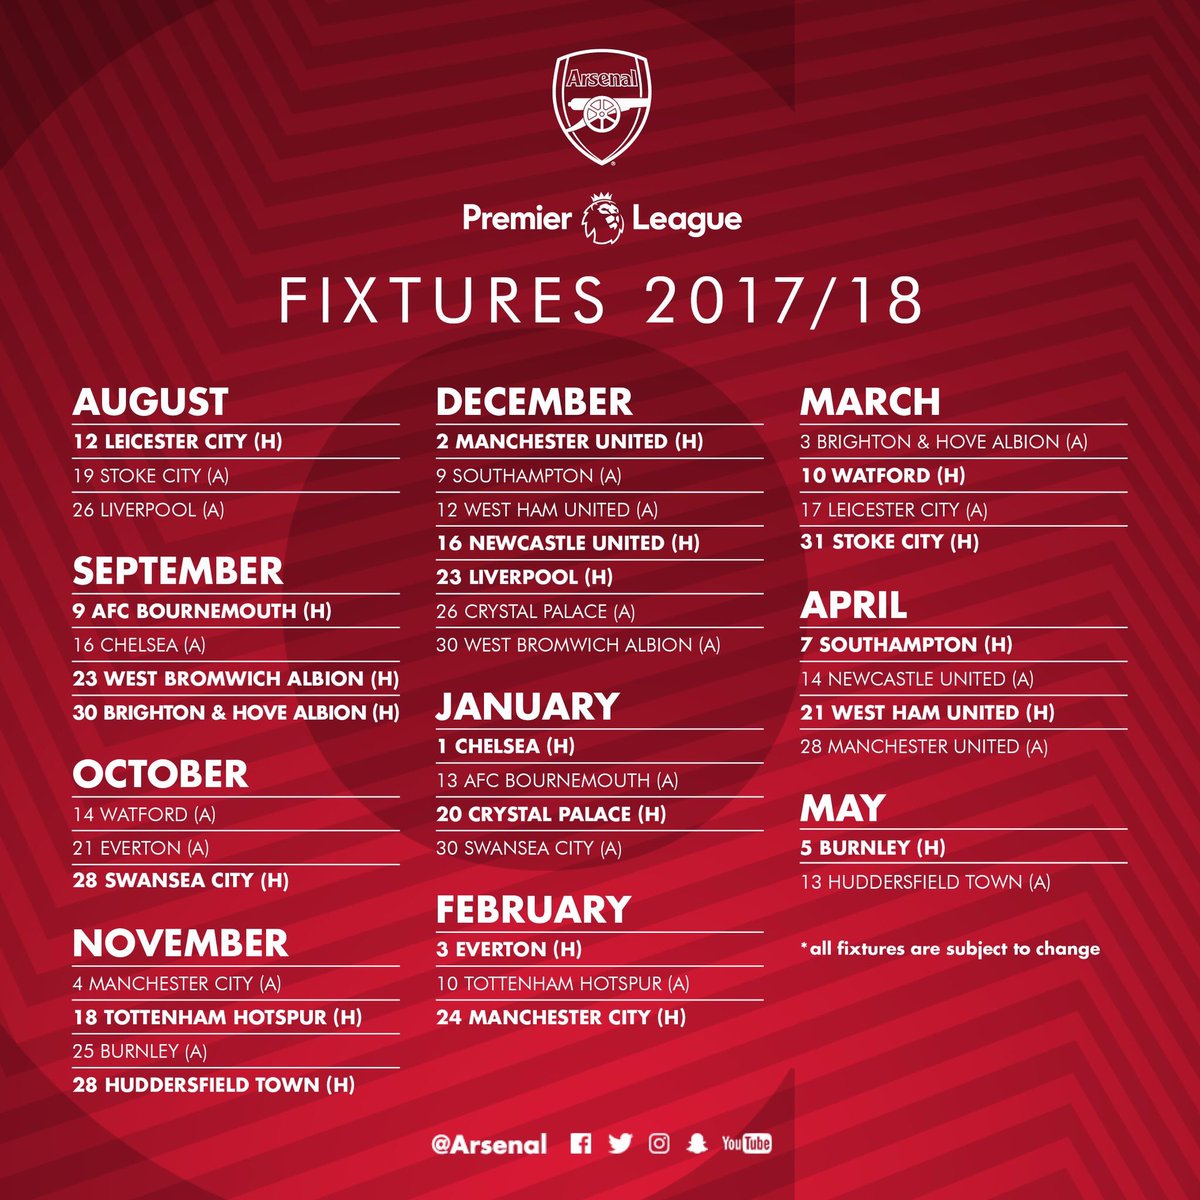 Arsenal On Twitter Arsenal Premier League Fixtures For 2017 18 Let Win The Title Coyg